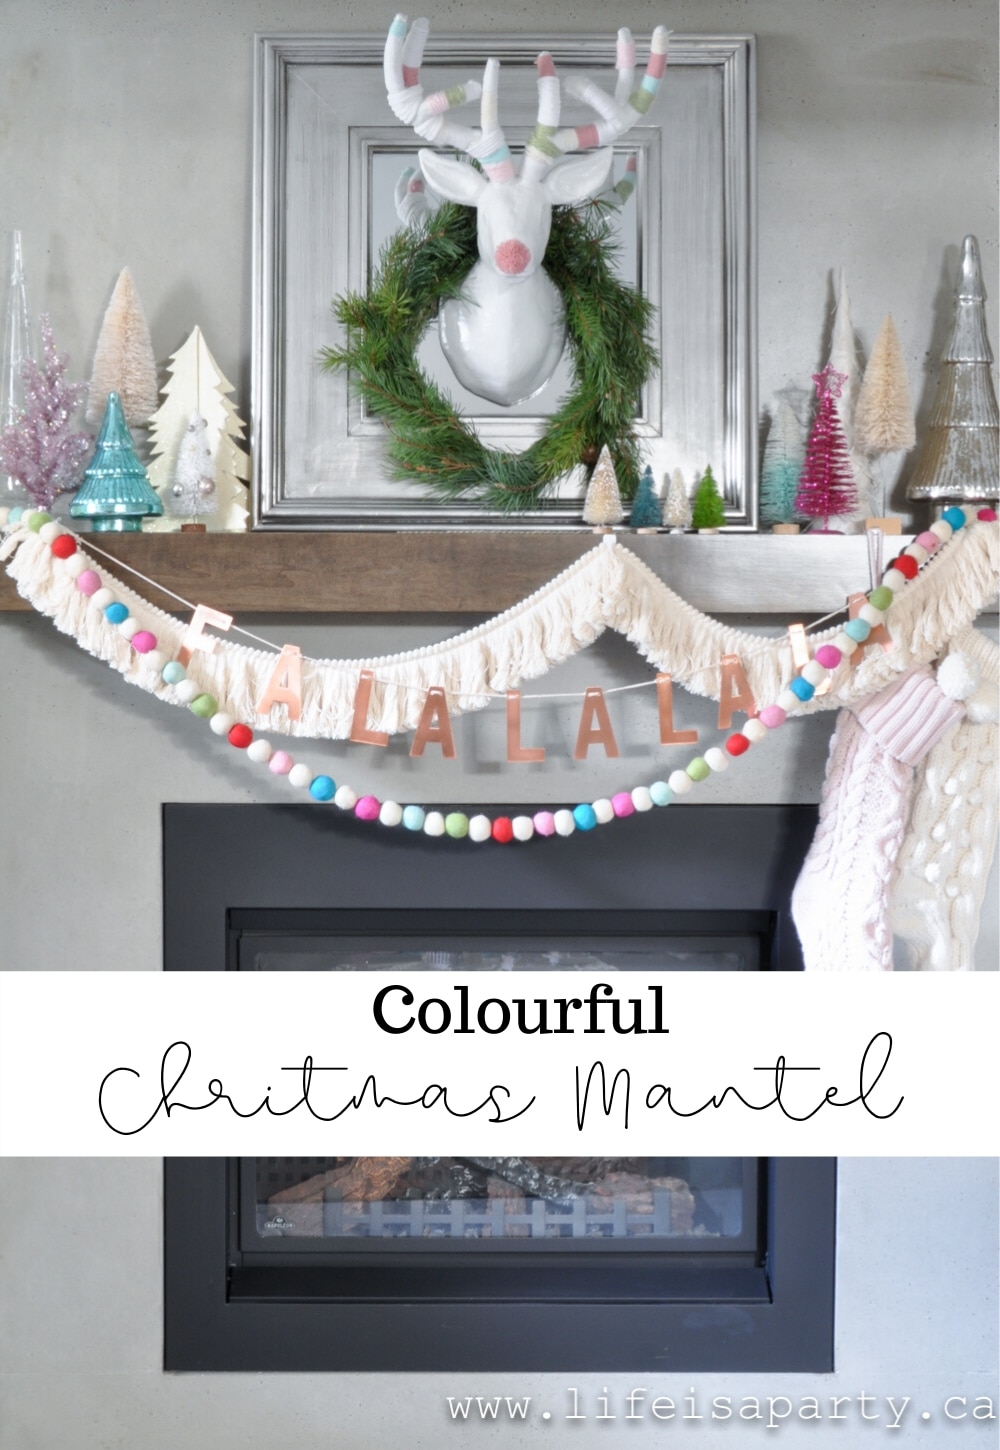 Christmas Fireplace Mantel: Colourful pastel with a boho vibe, this Anthropologie inspired mantel is so much fun!